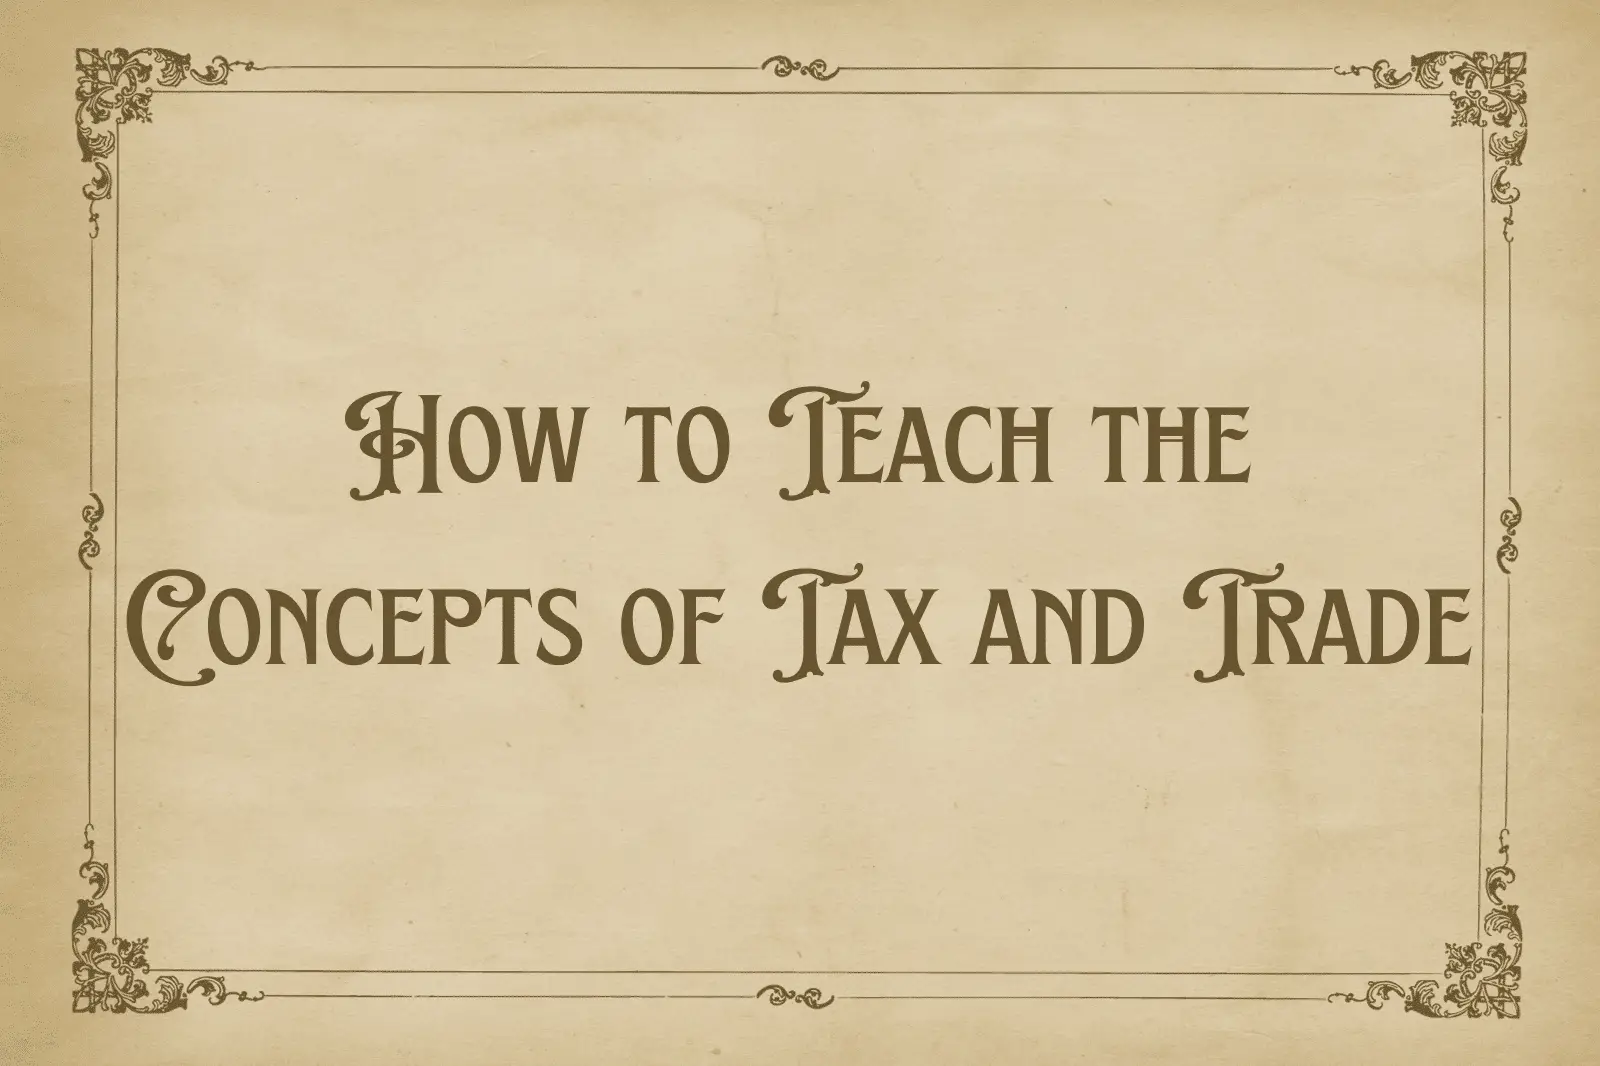 How to Teach the Concepts of Tax and Trade